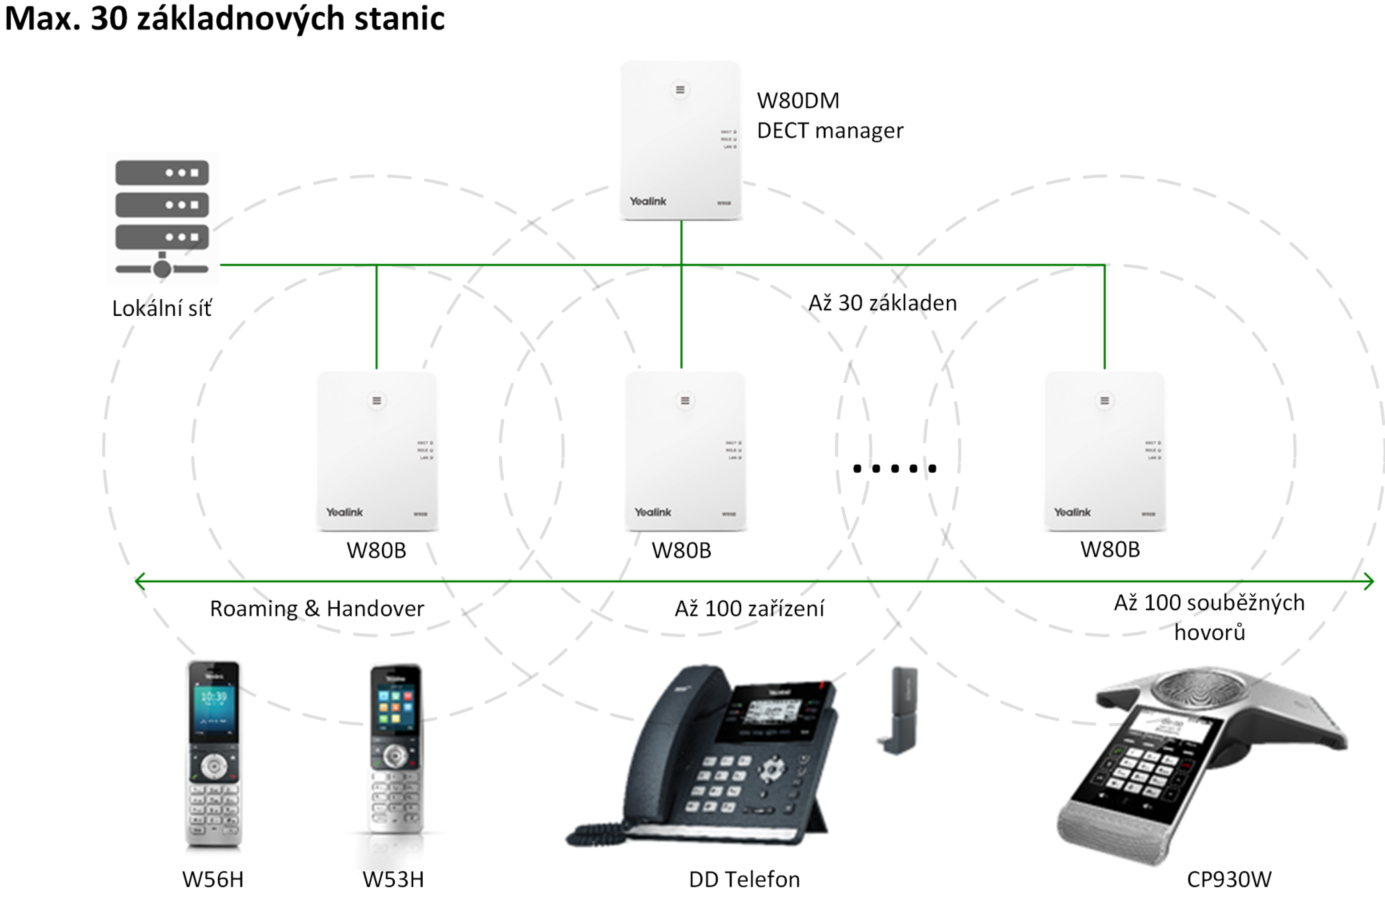 Yealink W80DM, IP DECT Manager Multi-Cell system